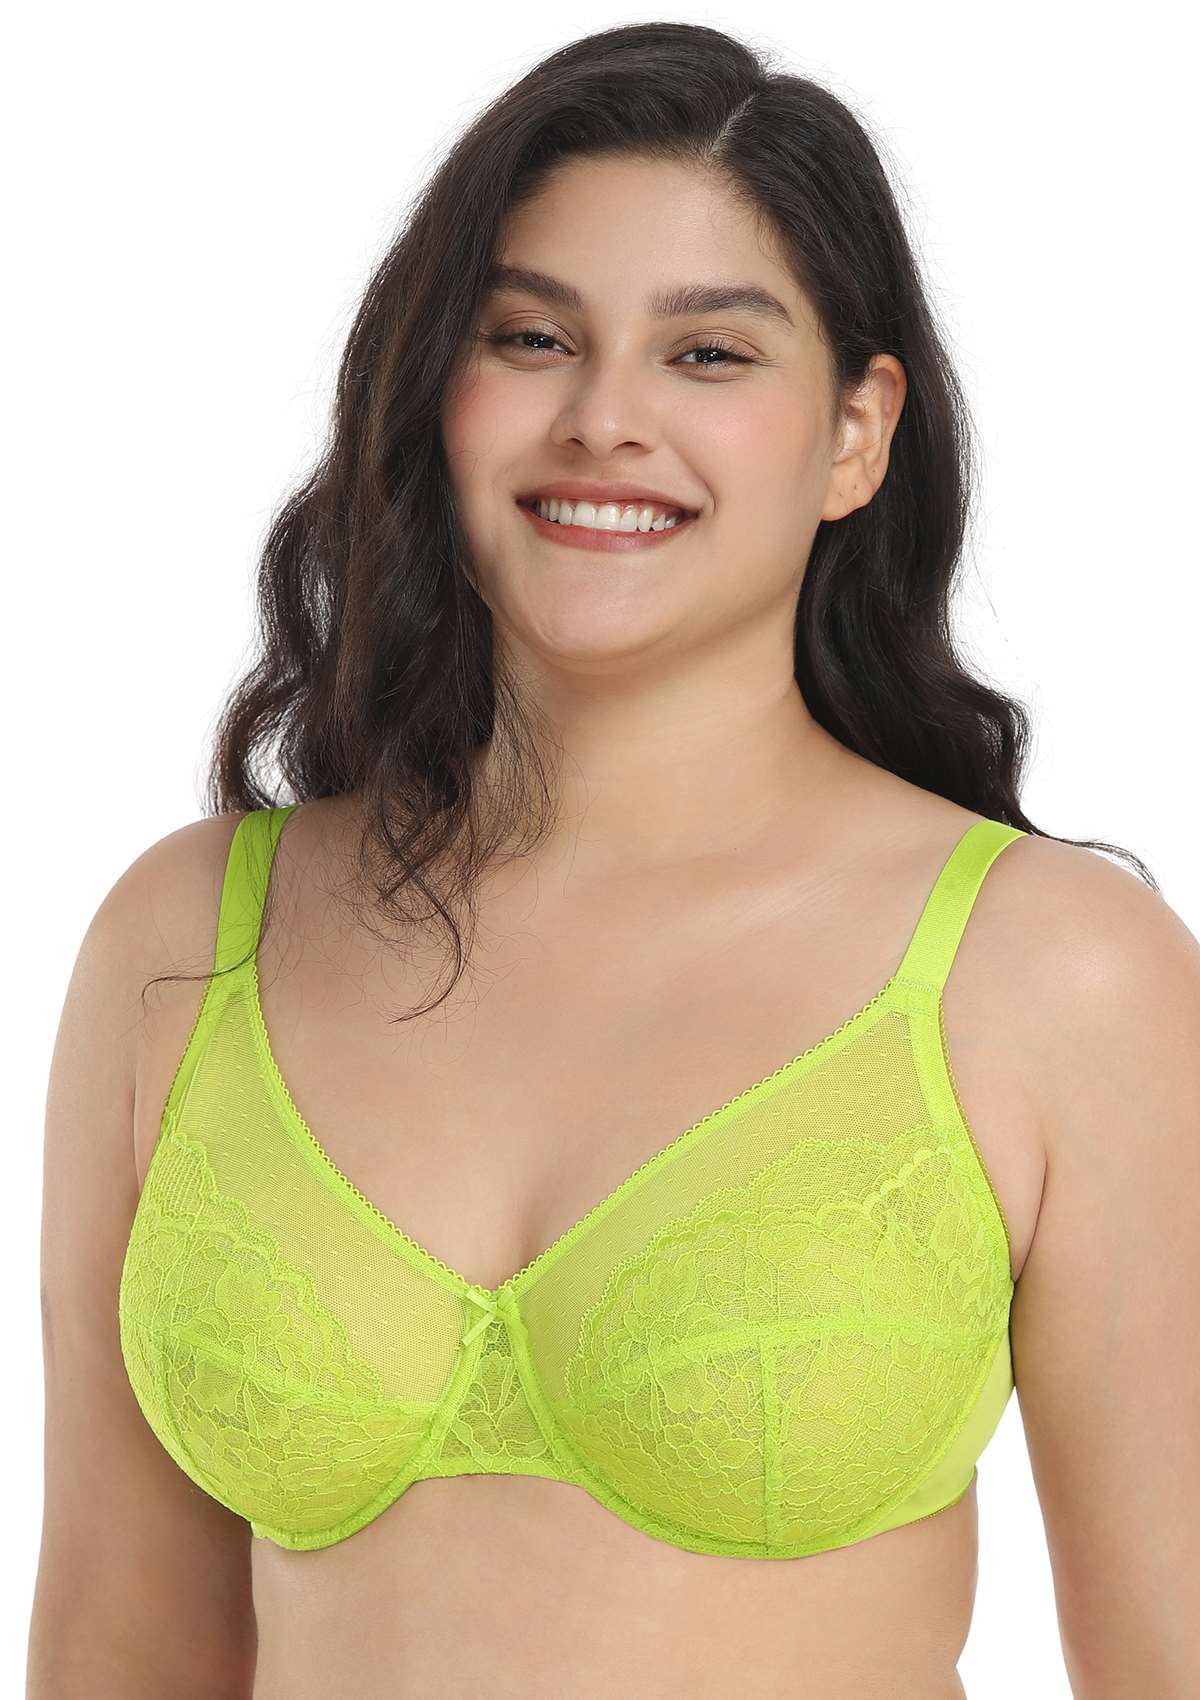 HSIA Enchante Full Cup Minimizing Bra: Supportive Unlined Lace Bra - Lime Green / 40 / DDD/F